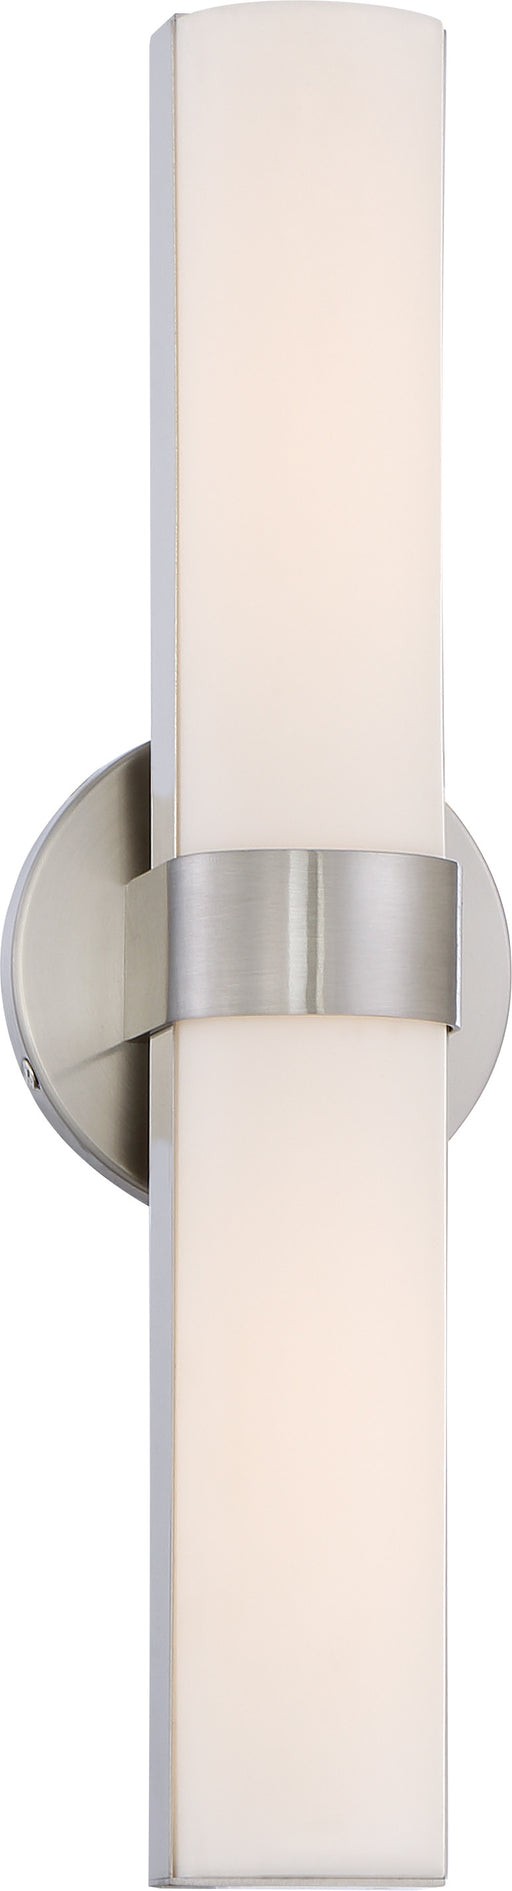 SATCO/NUVO Bond Double 17-1/2 Inch LED Vanity With White Acrylic Lens (62-732)